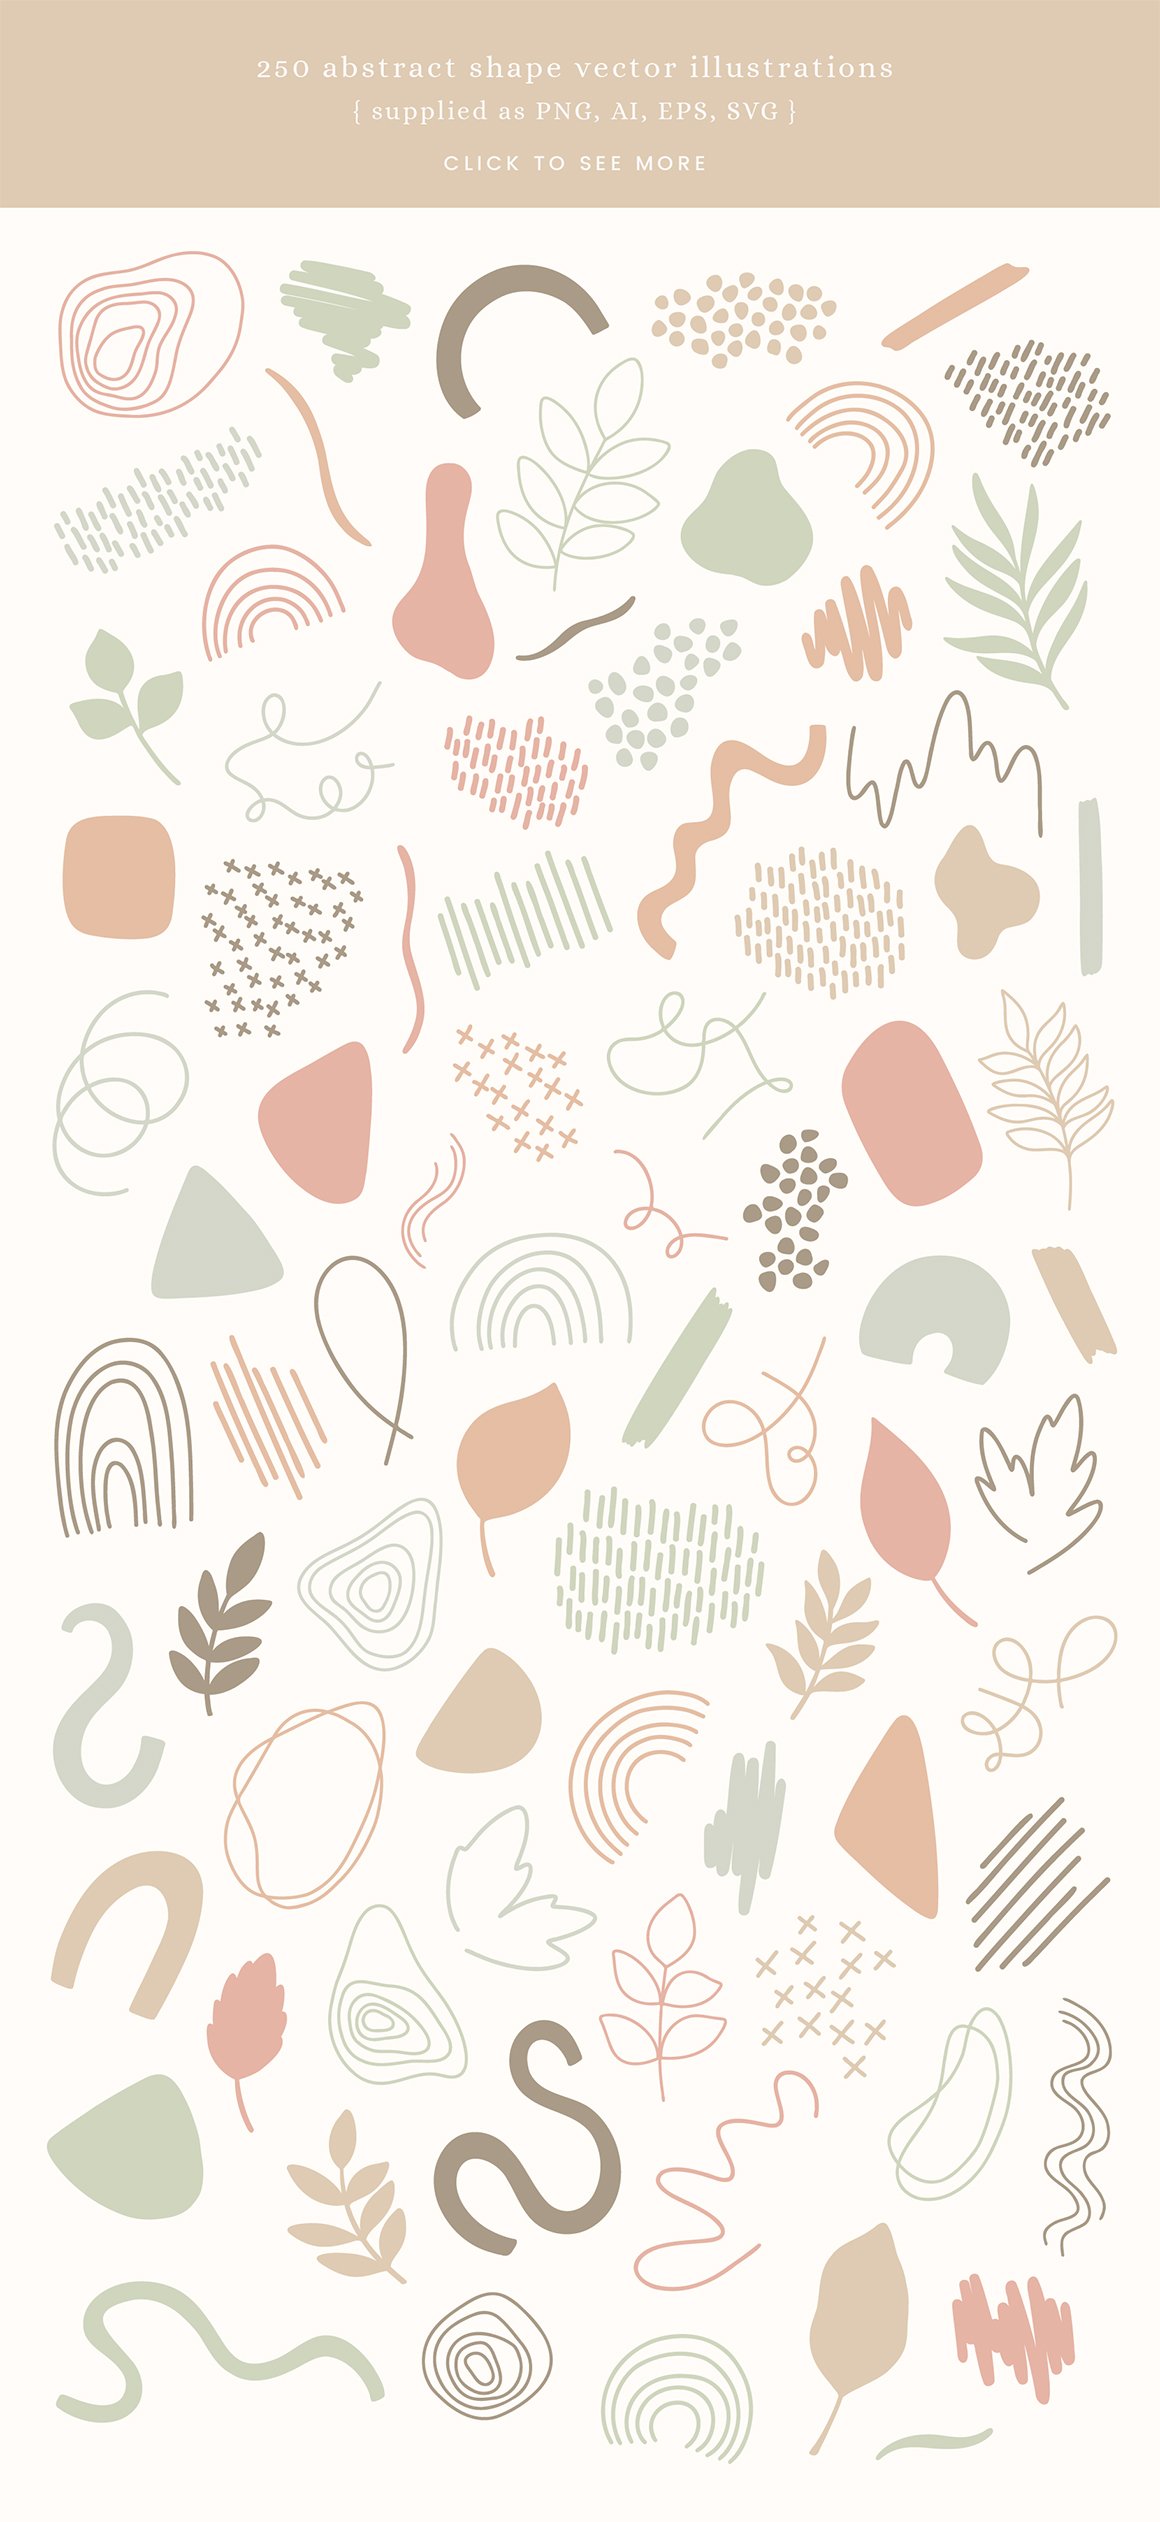 Abstract Shapes Vector Illustrations